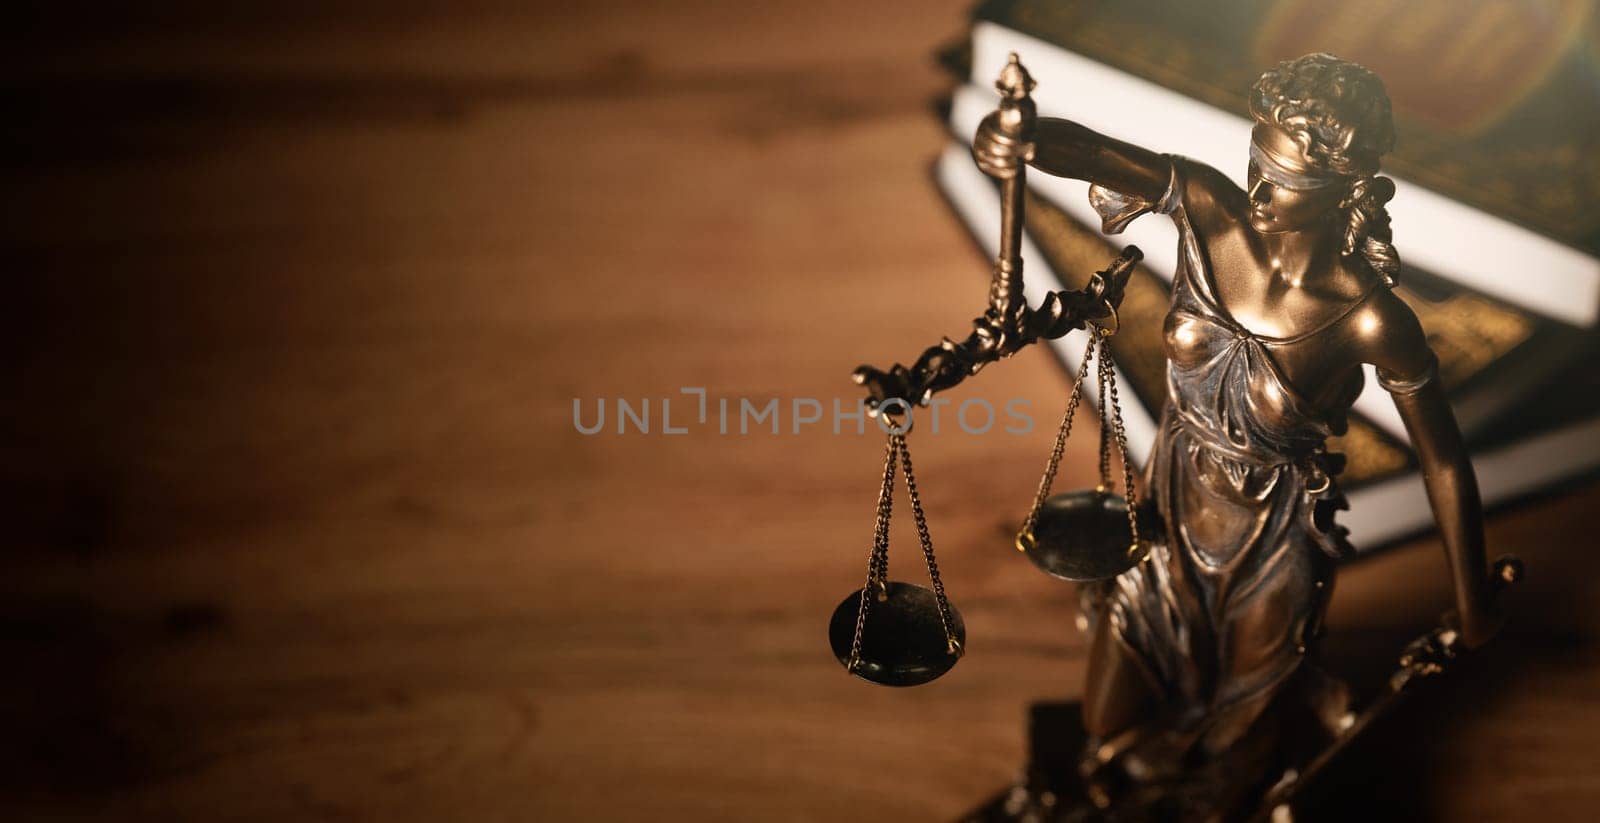 Justice and legal book on wooden table by simpson33